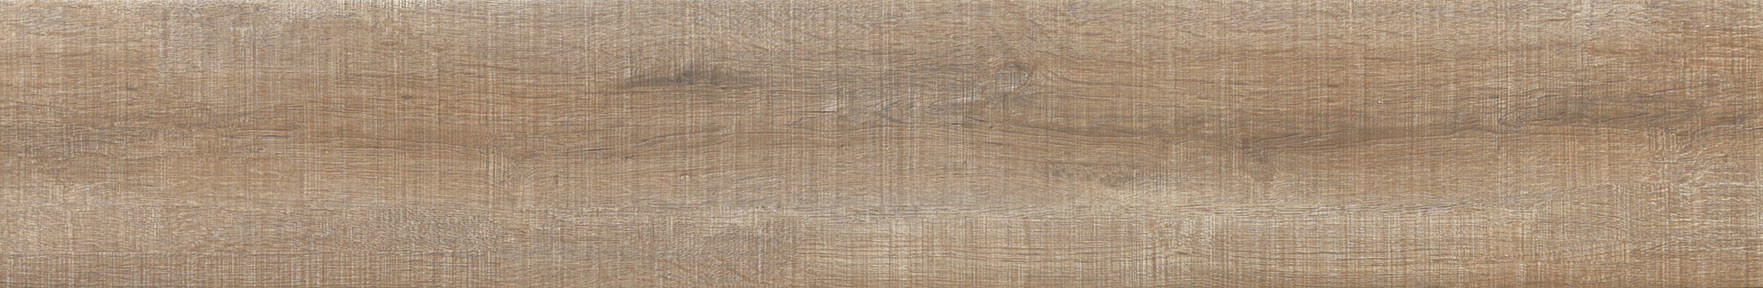 Quality 200 × 1200 mm Ceramic Tiles Wood Design Wear - Resistant For Project wholesale